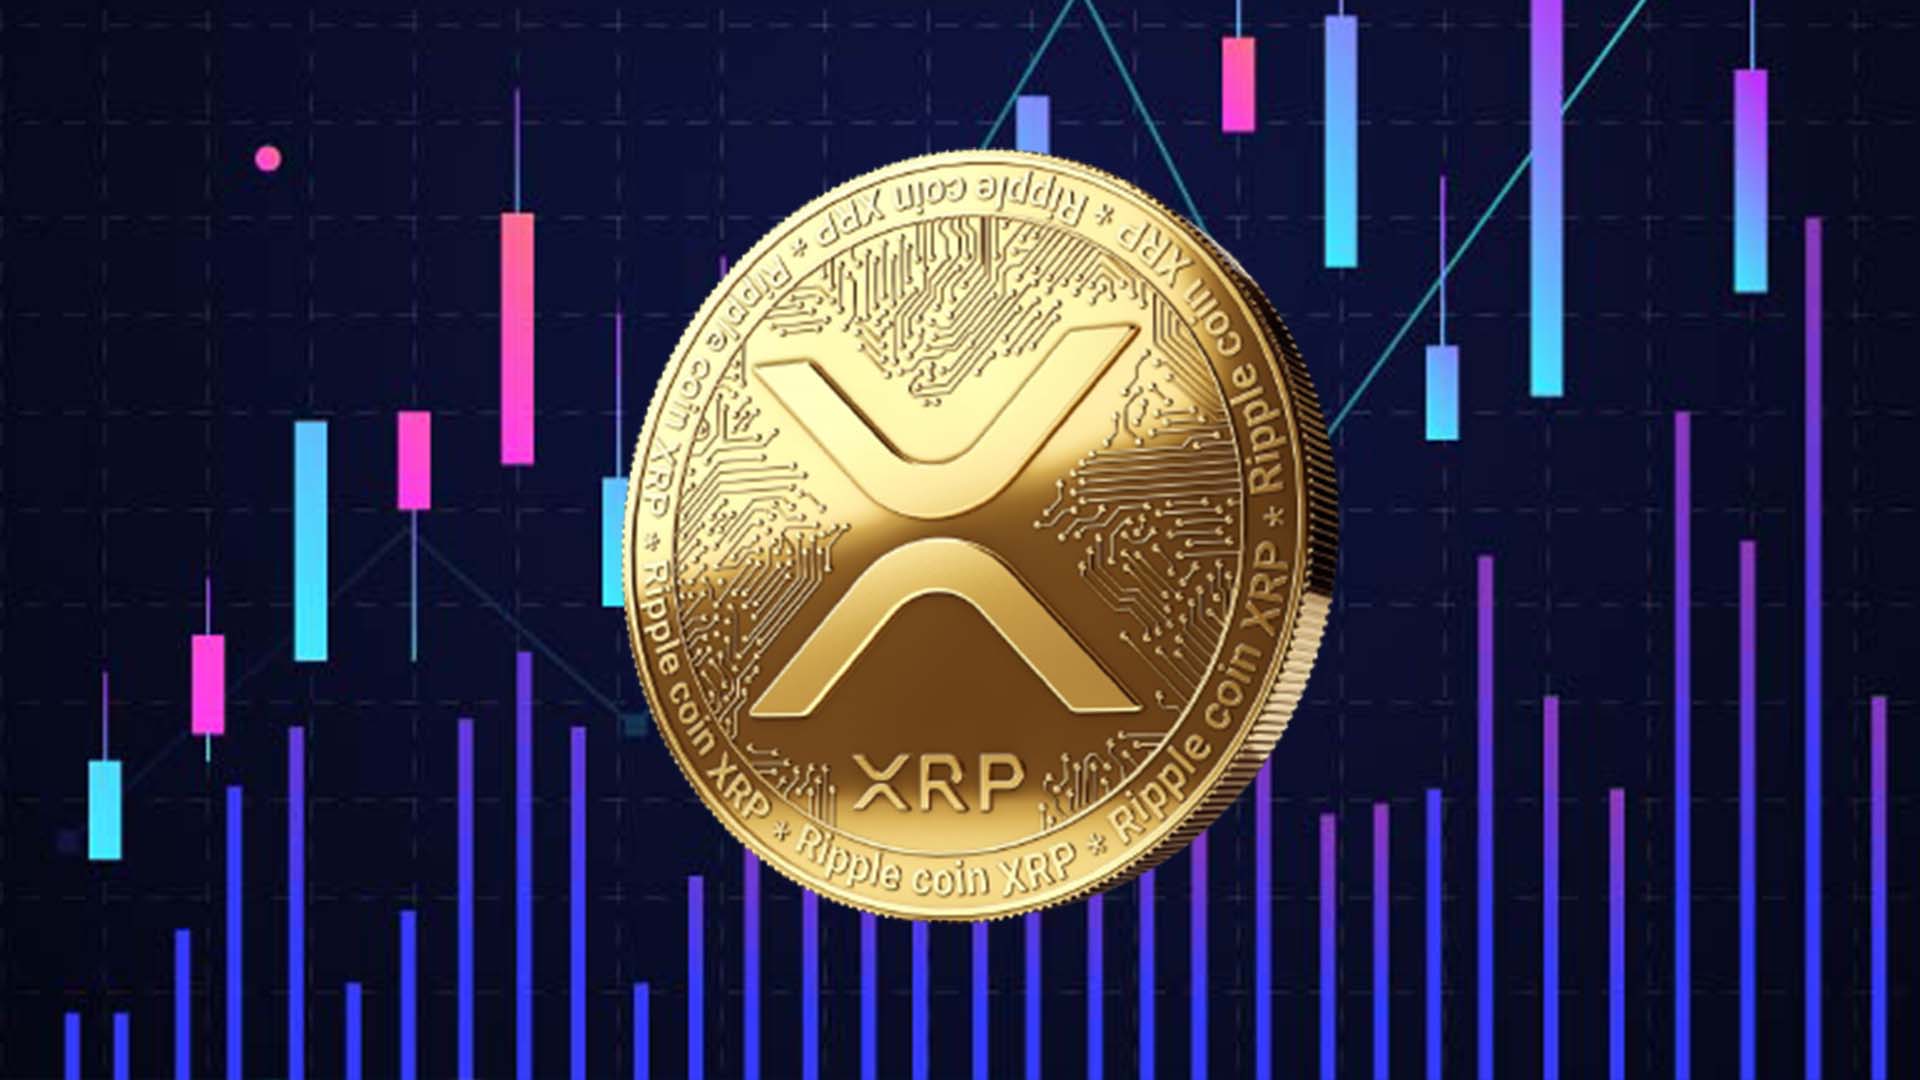 XRP Price Prediction: Is Christmas Coming Early For XRP?